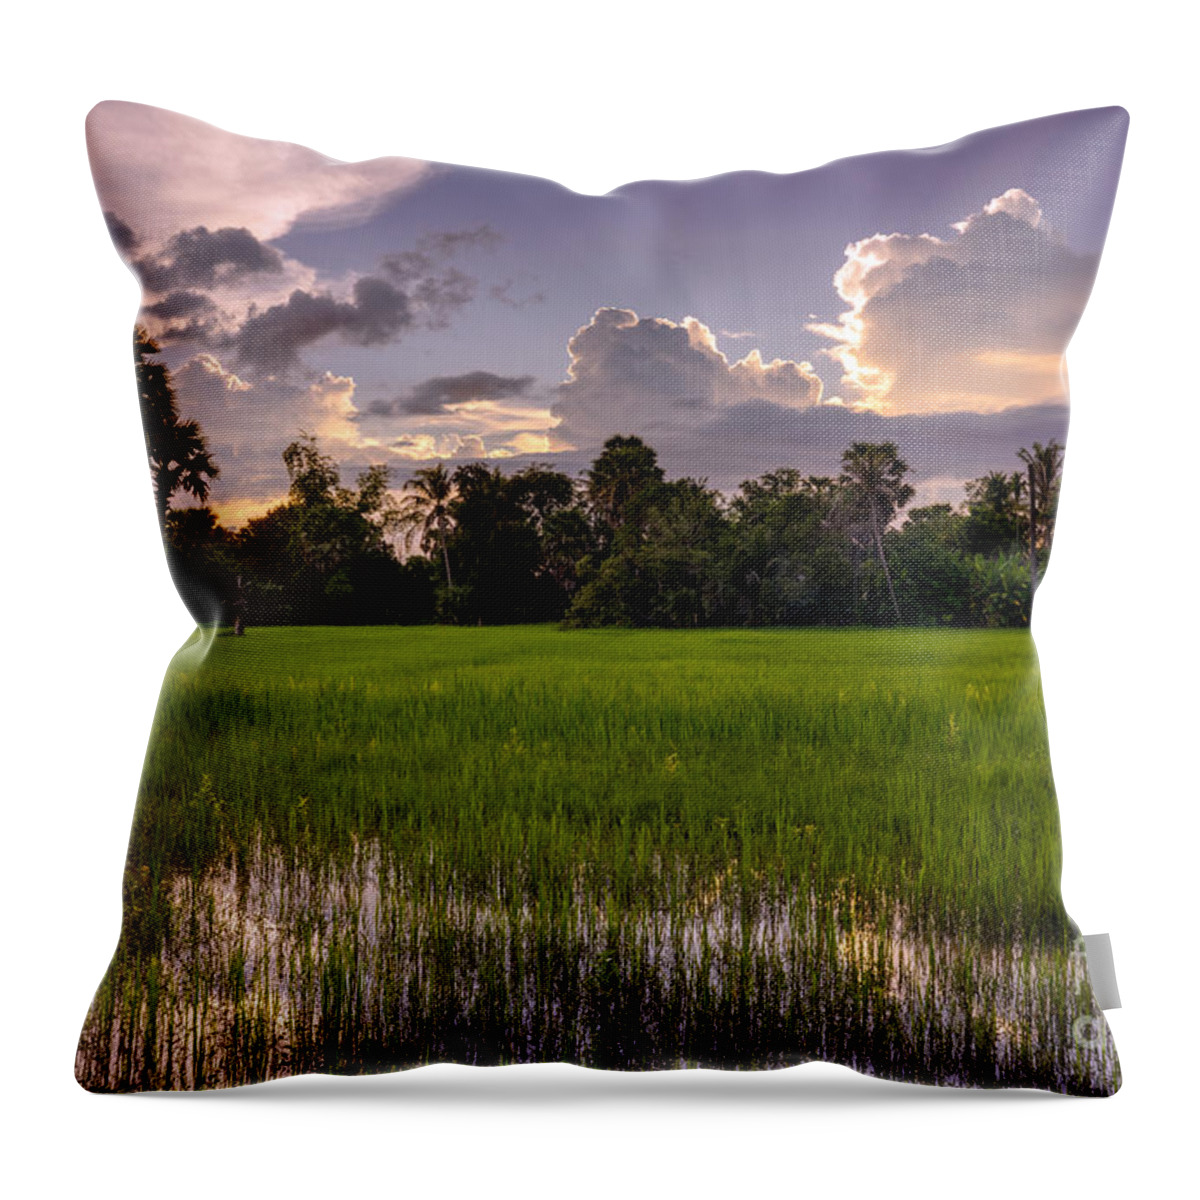 Cambodia Throw Pillow featuring the photograph Cambodian Rice Fields Dramatic Cloudscape by Mike Reid